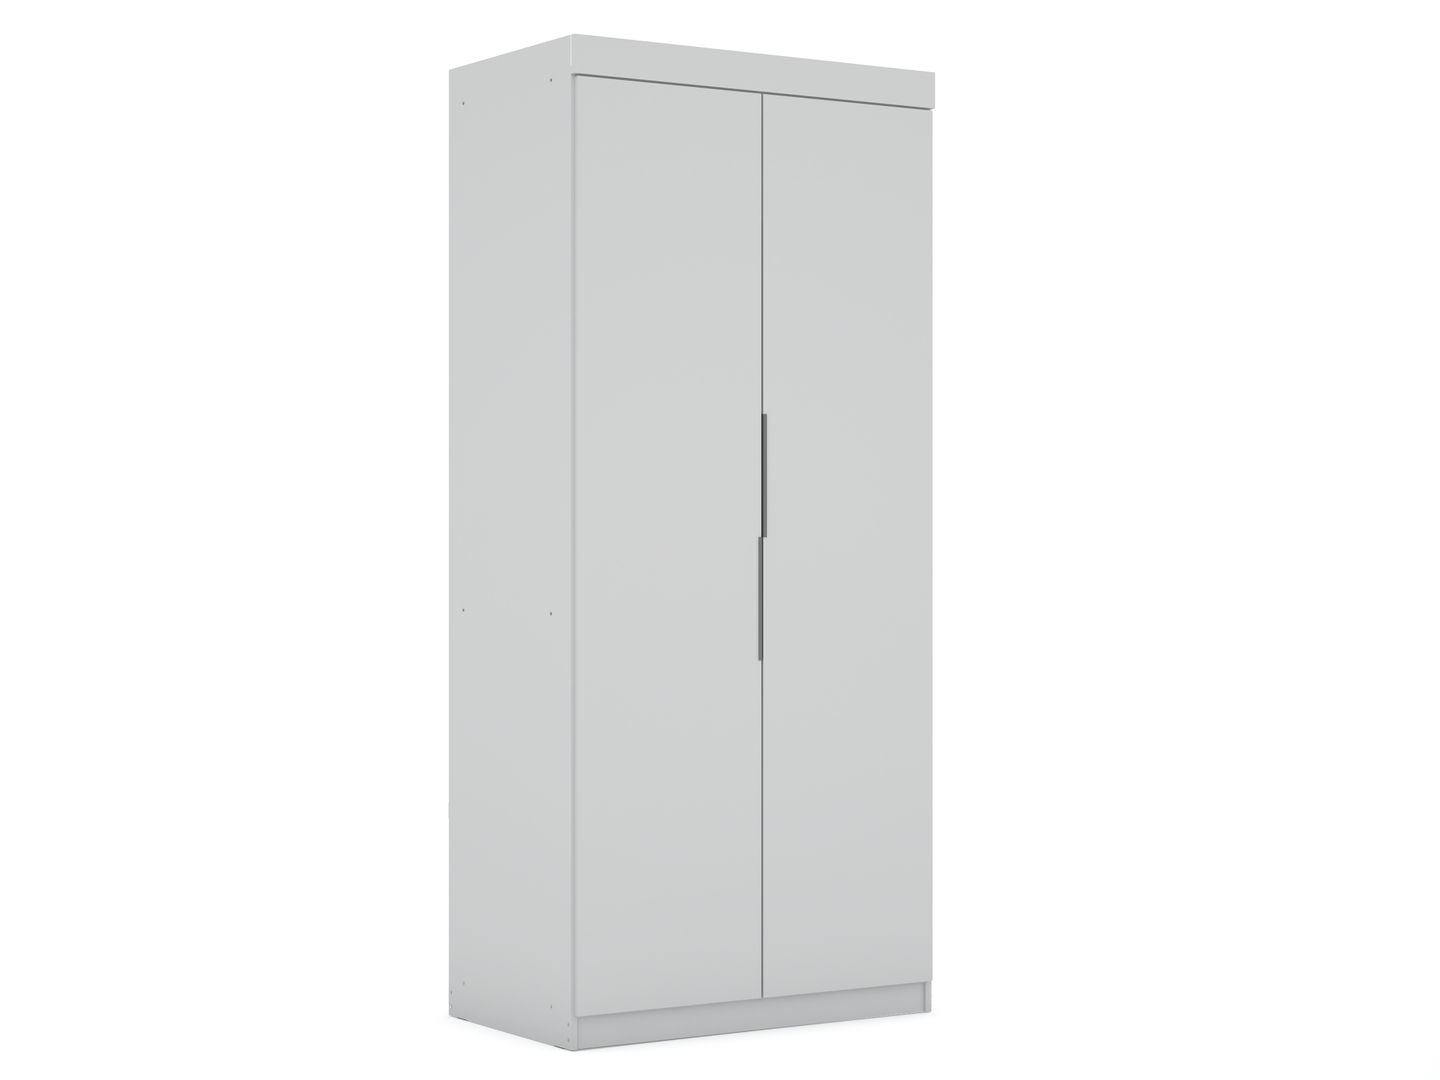 Manhattan Comfort Mulberry 2.0 Sectional Modern Armoire Wardrobe Closet with 2 Drawers in WhiteManhattan Comfort-Armoires and Wardrobes - - 1